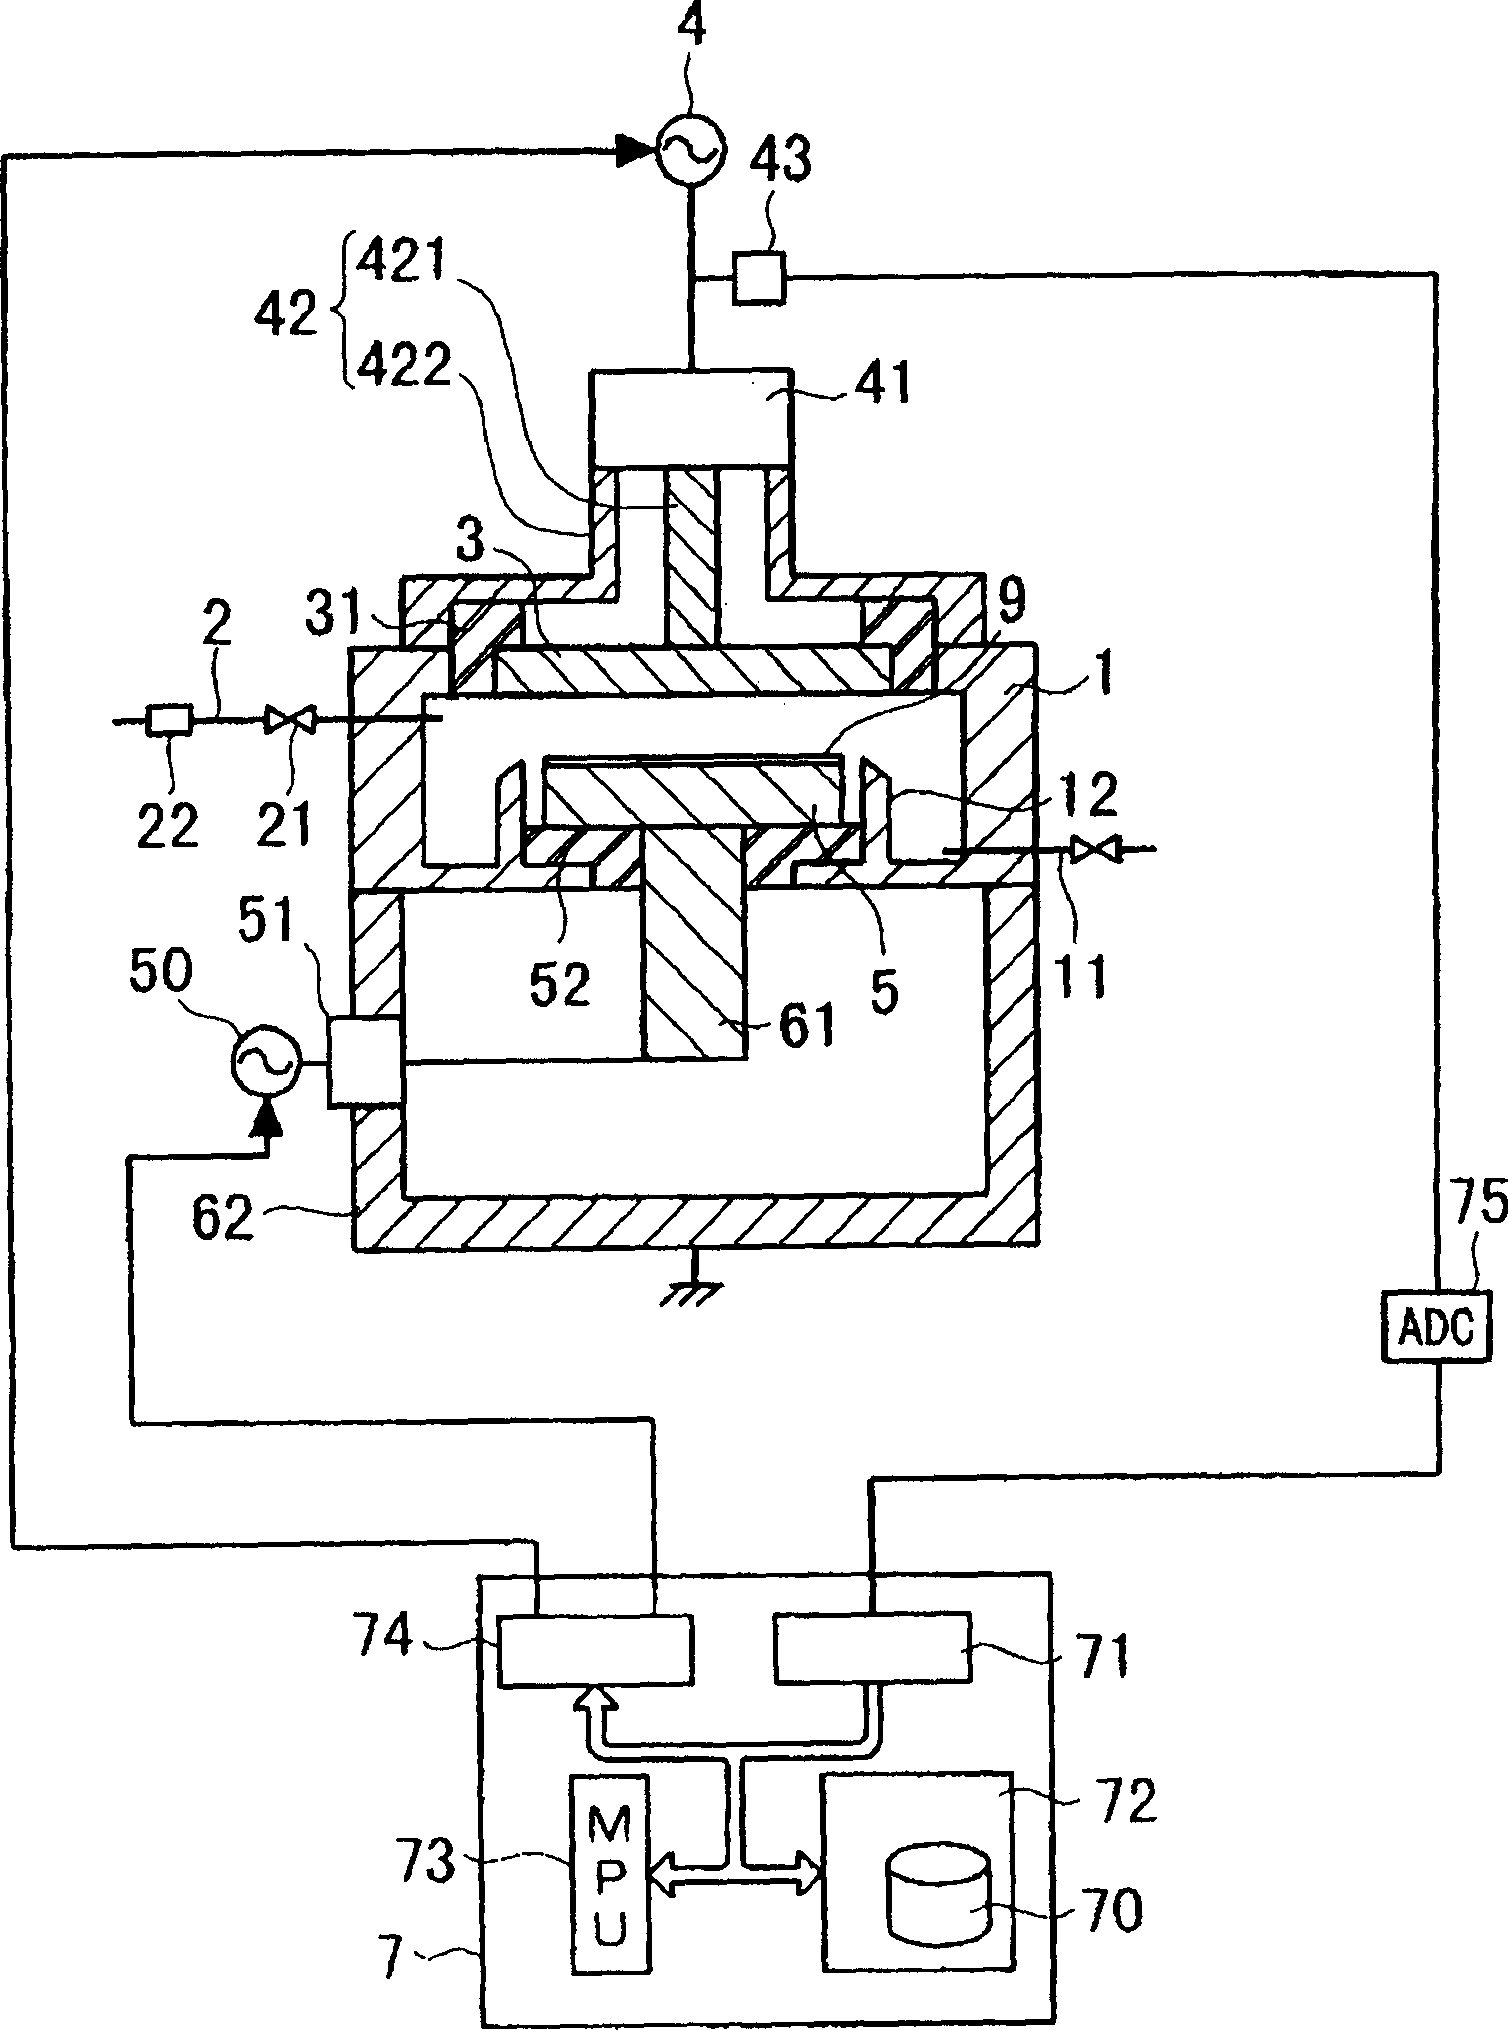 Method and system for processing radio-frequency plasma